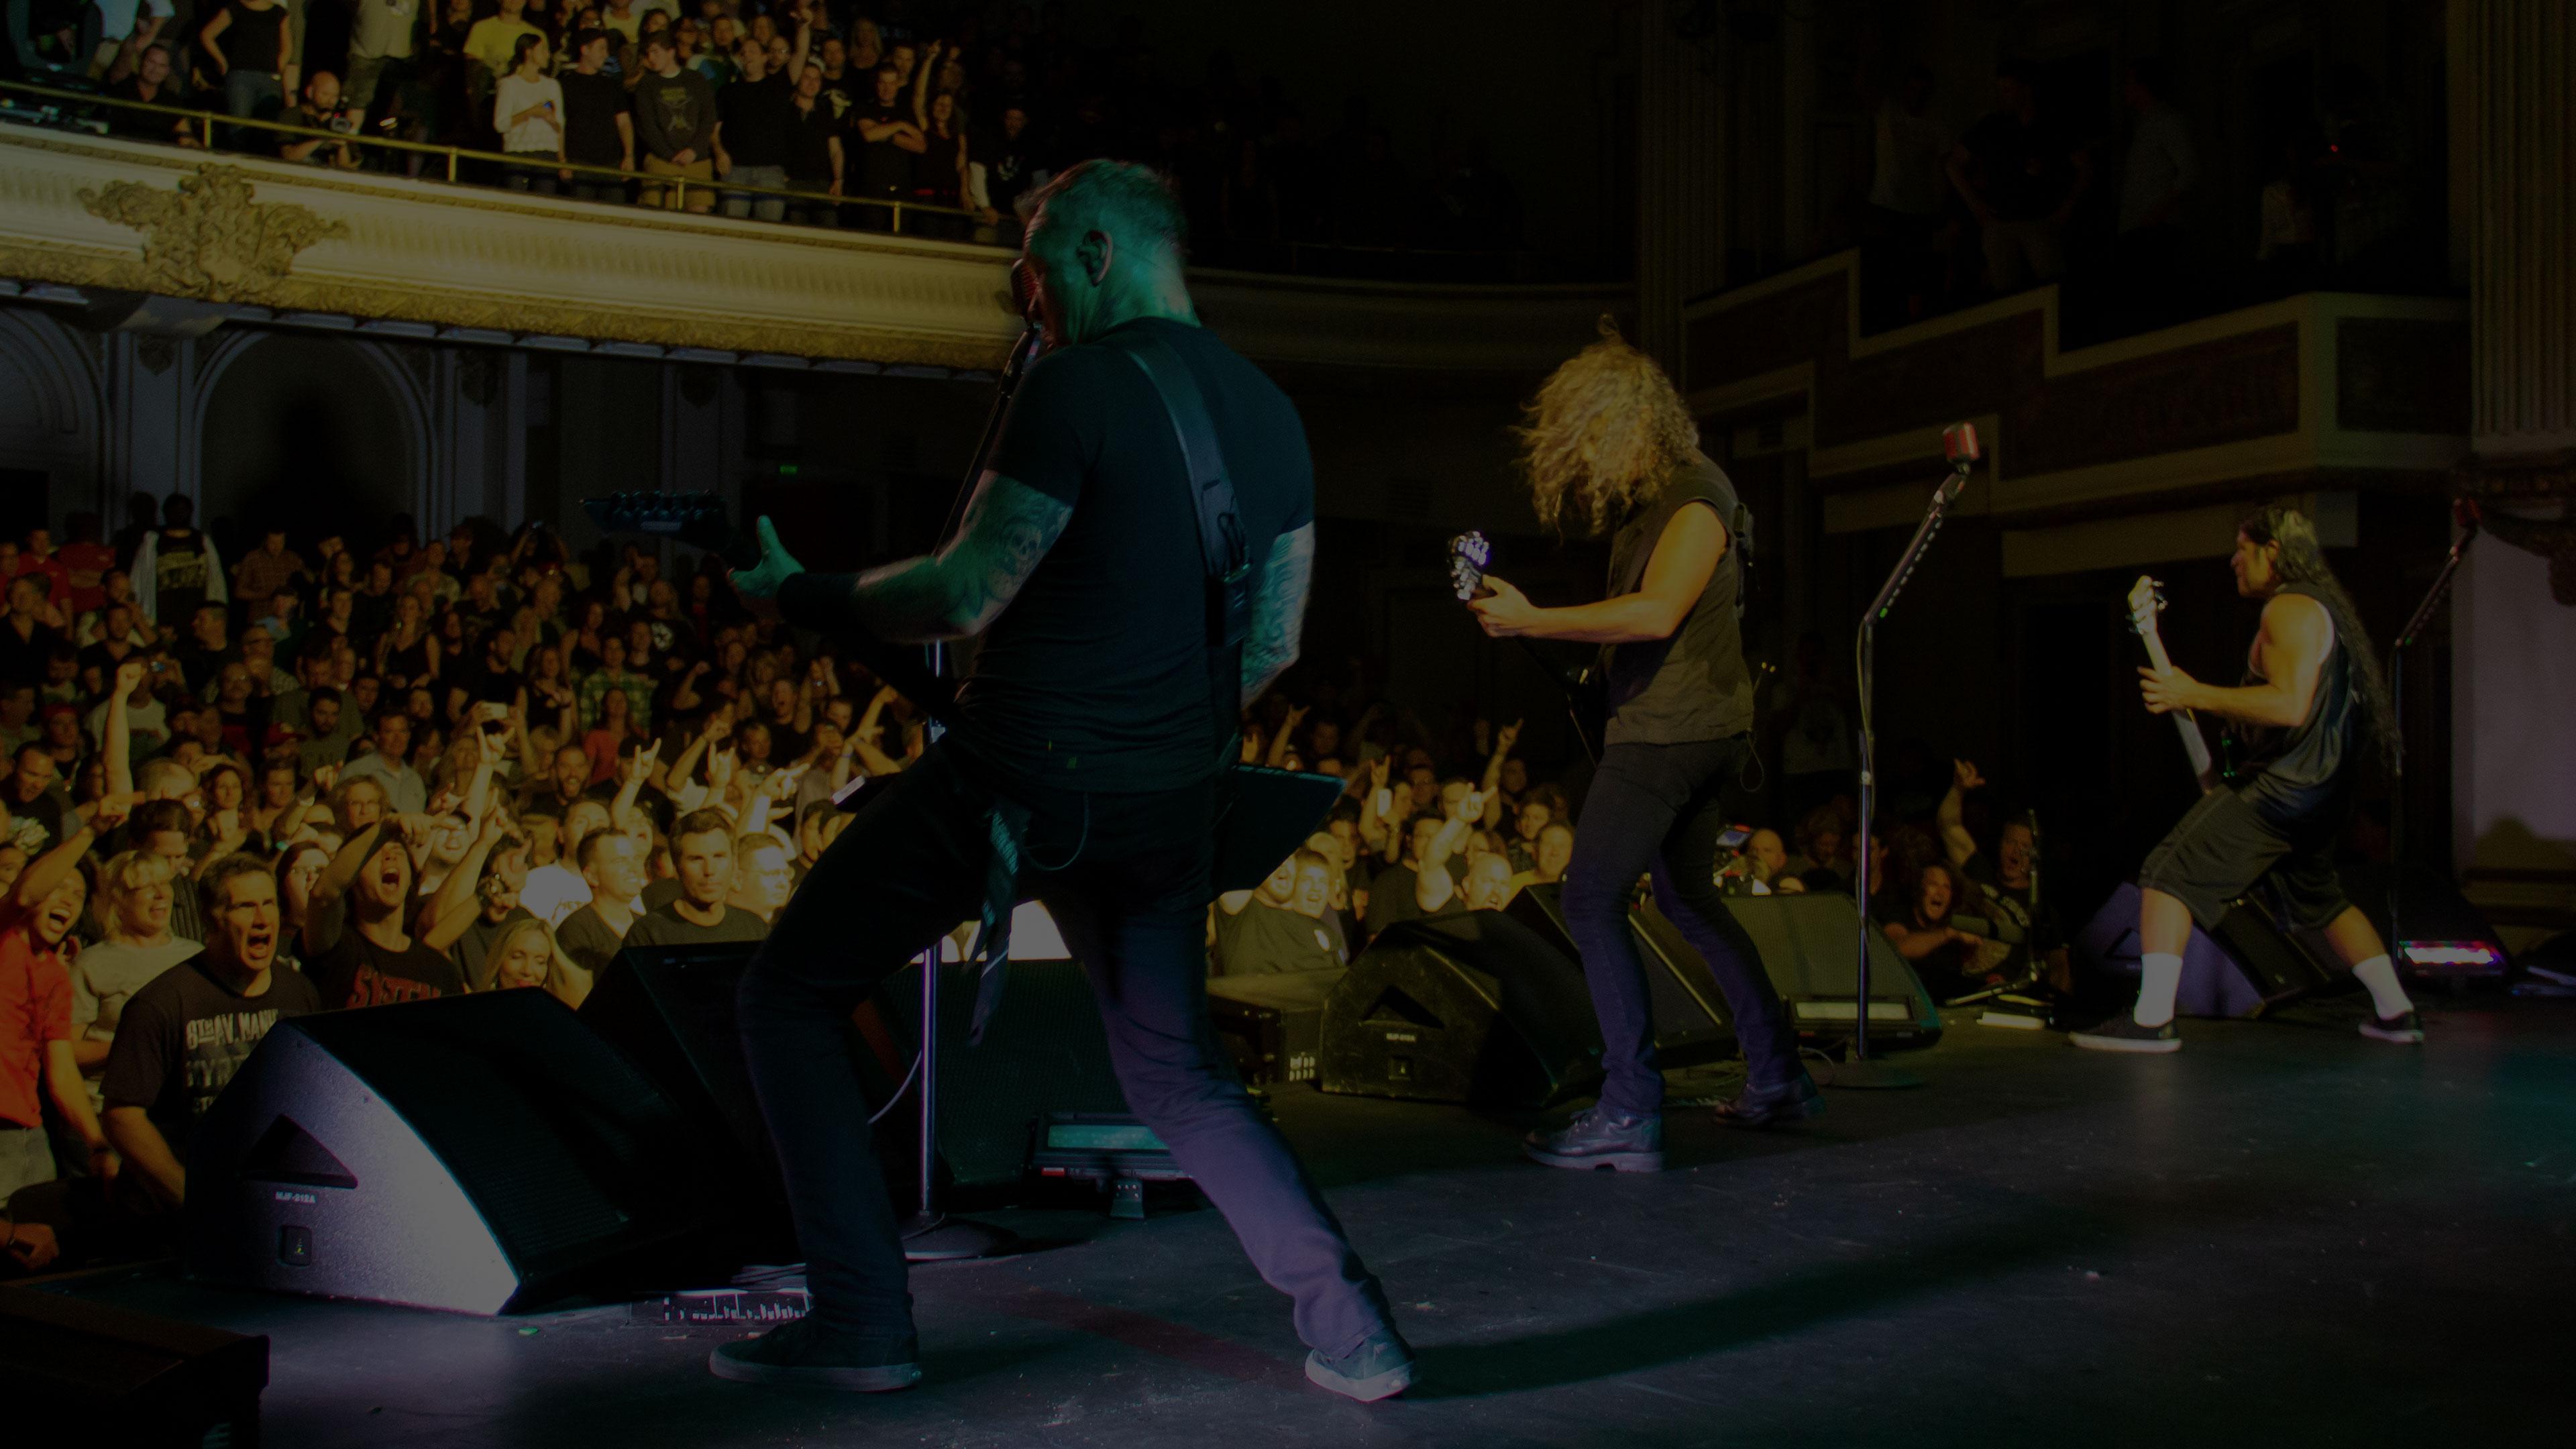 Banner Image for the photo gallery from the gig in San Diego, CA shot on July 19, 2013